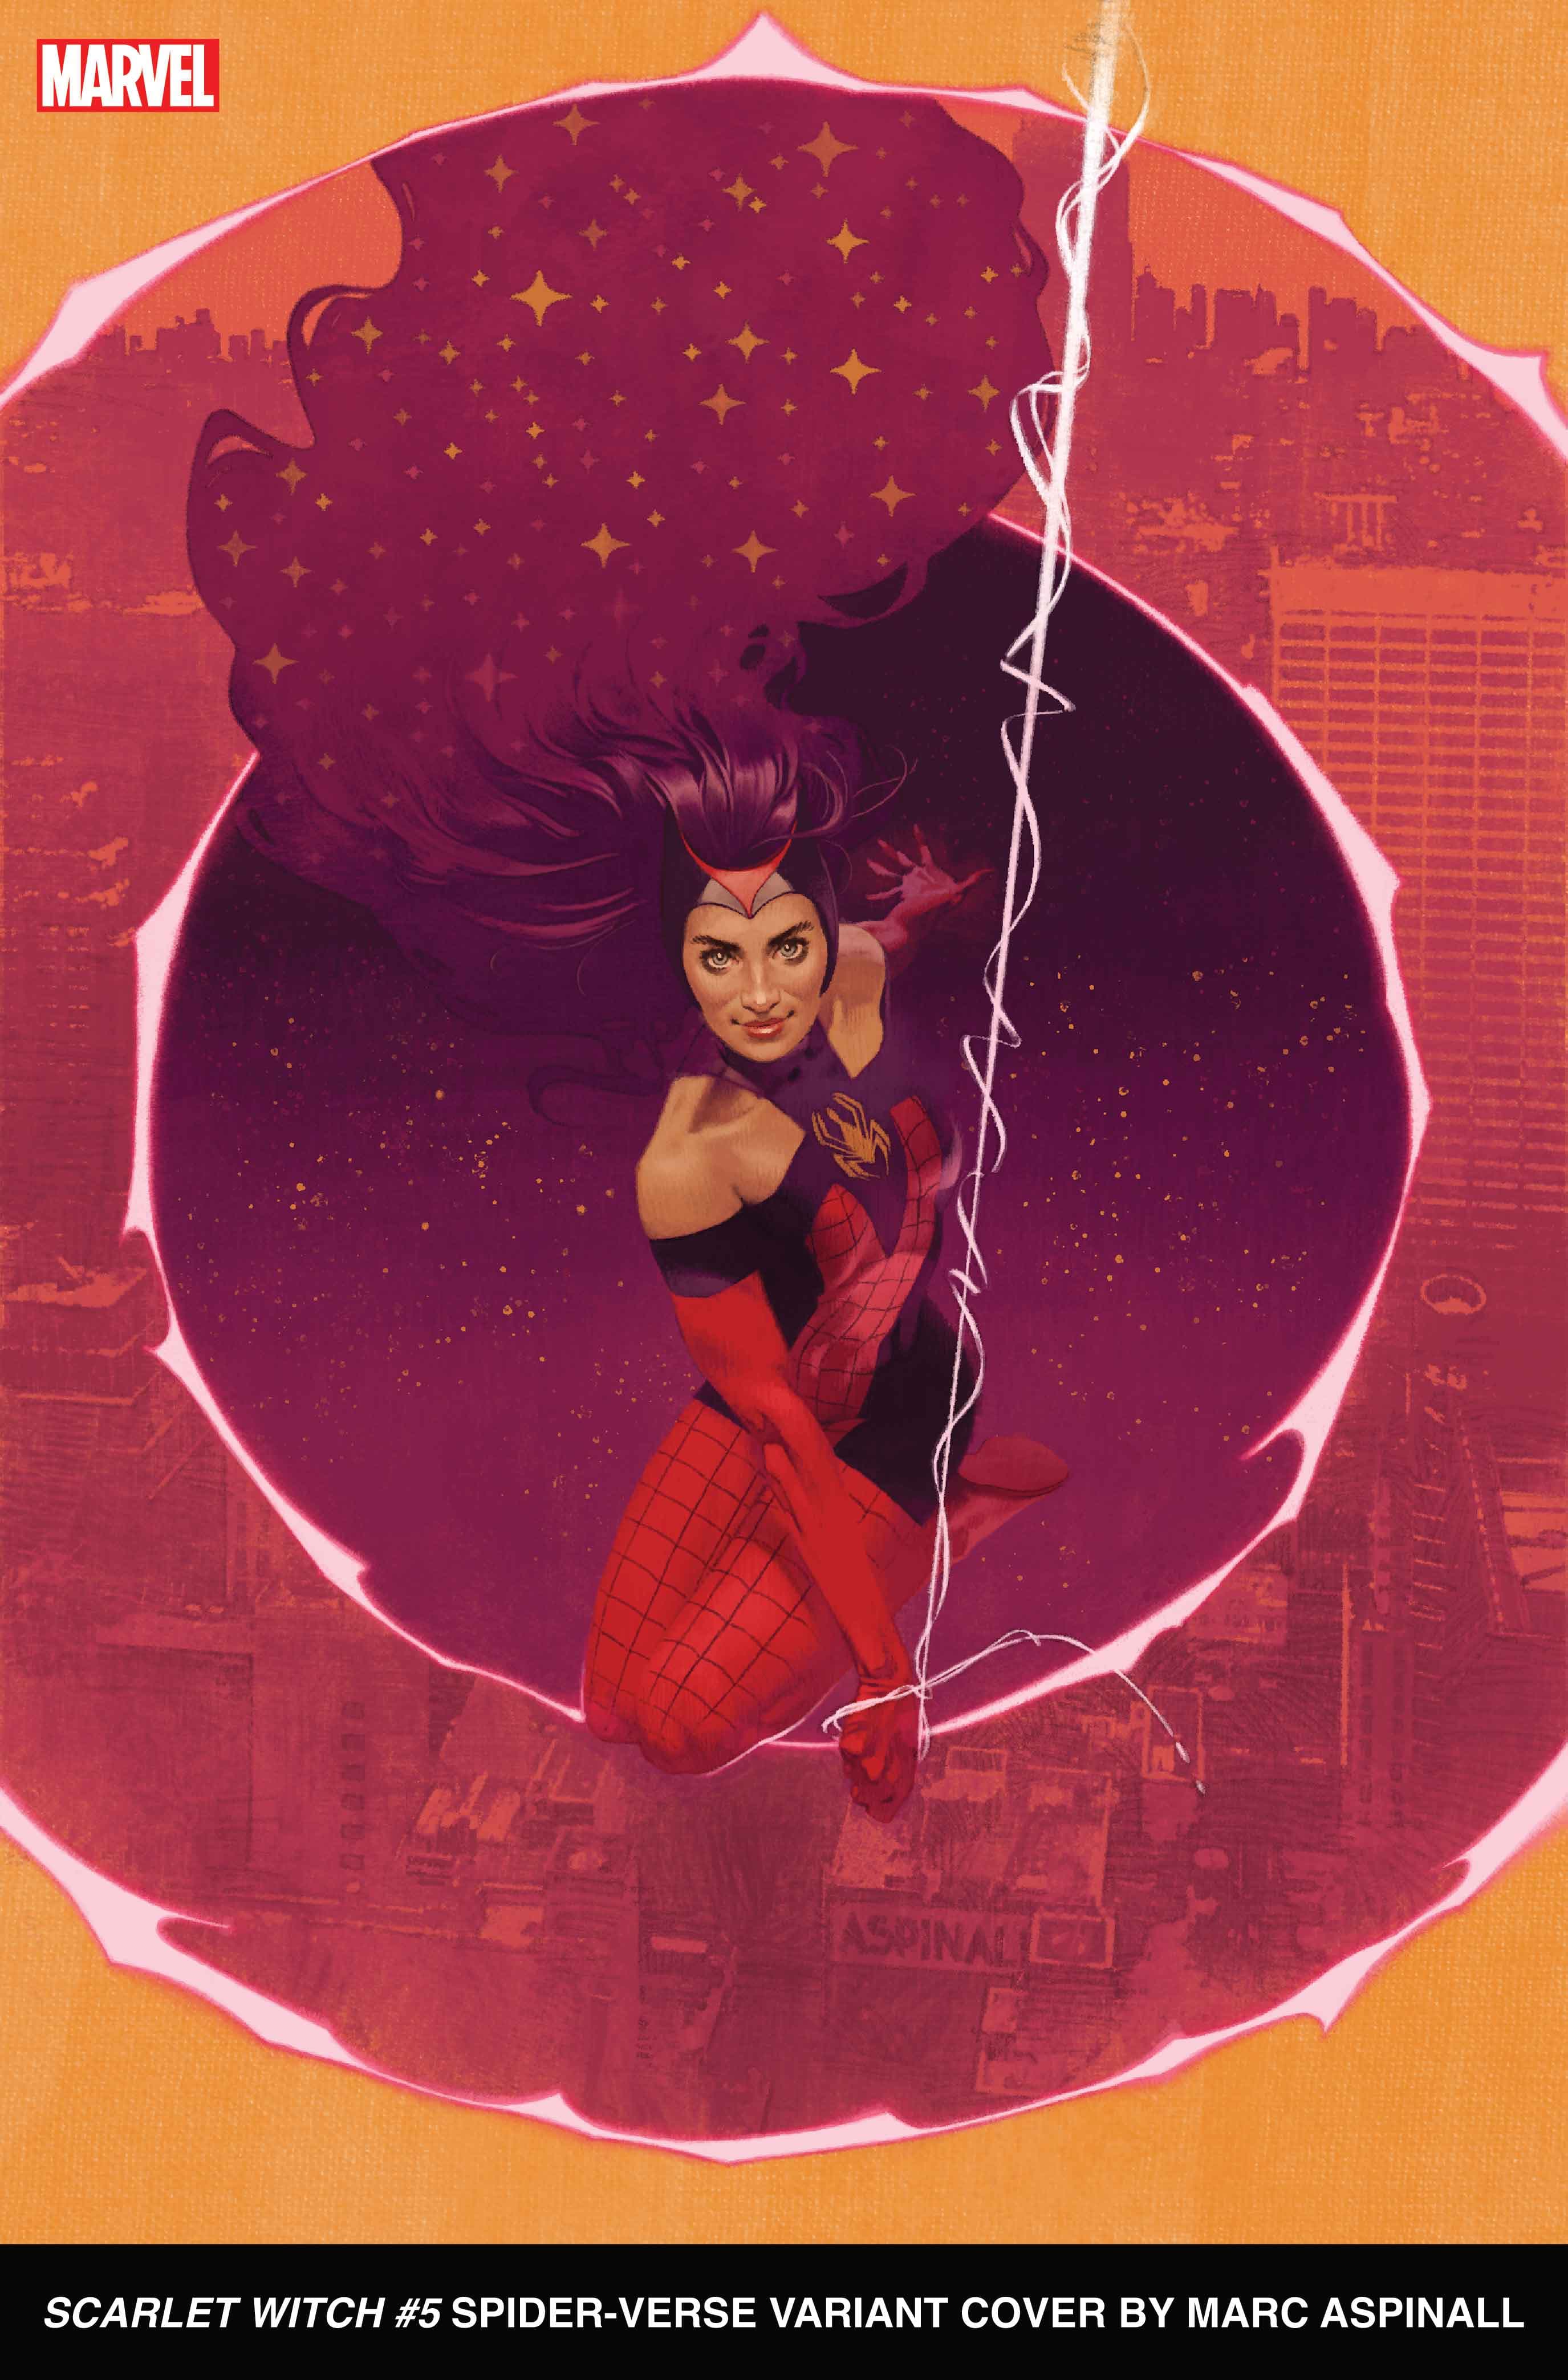 SCARLET WITCH #5 Spider-Verse Variant Cover by Marc Aspinall